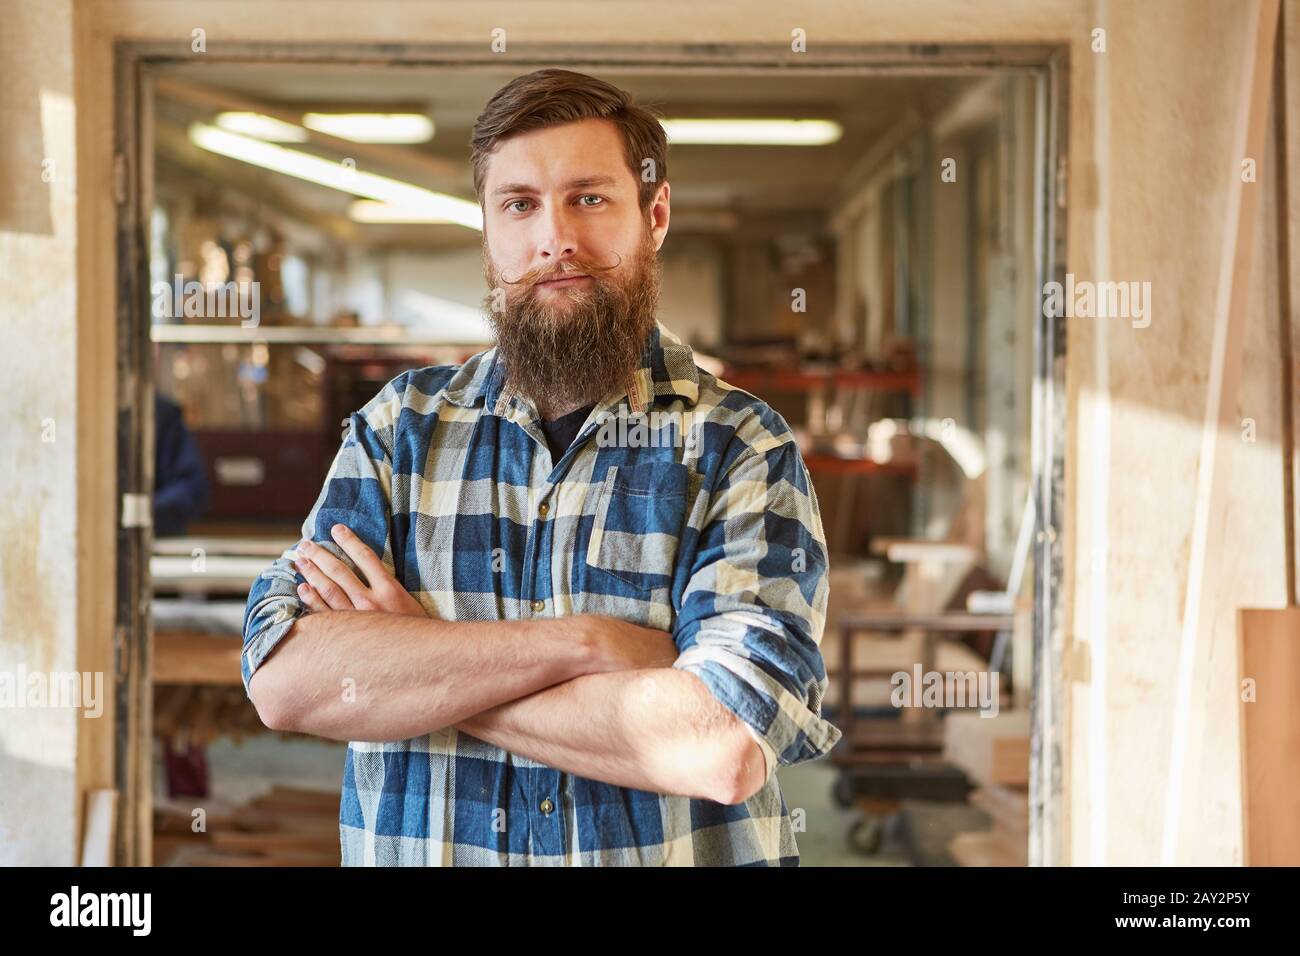 Hipster carpenter or joiner with crossed arms in a carpentry workshop Stock Photo